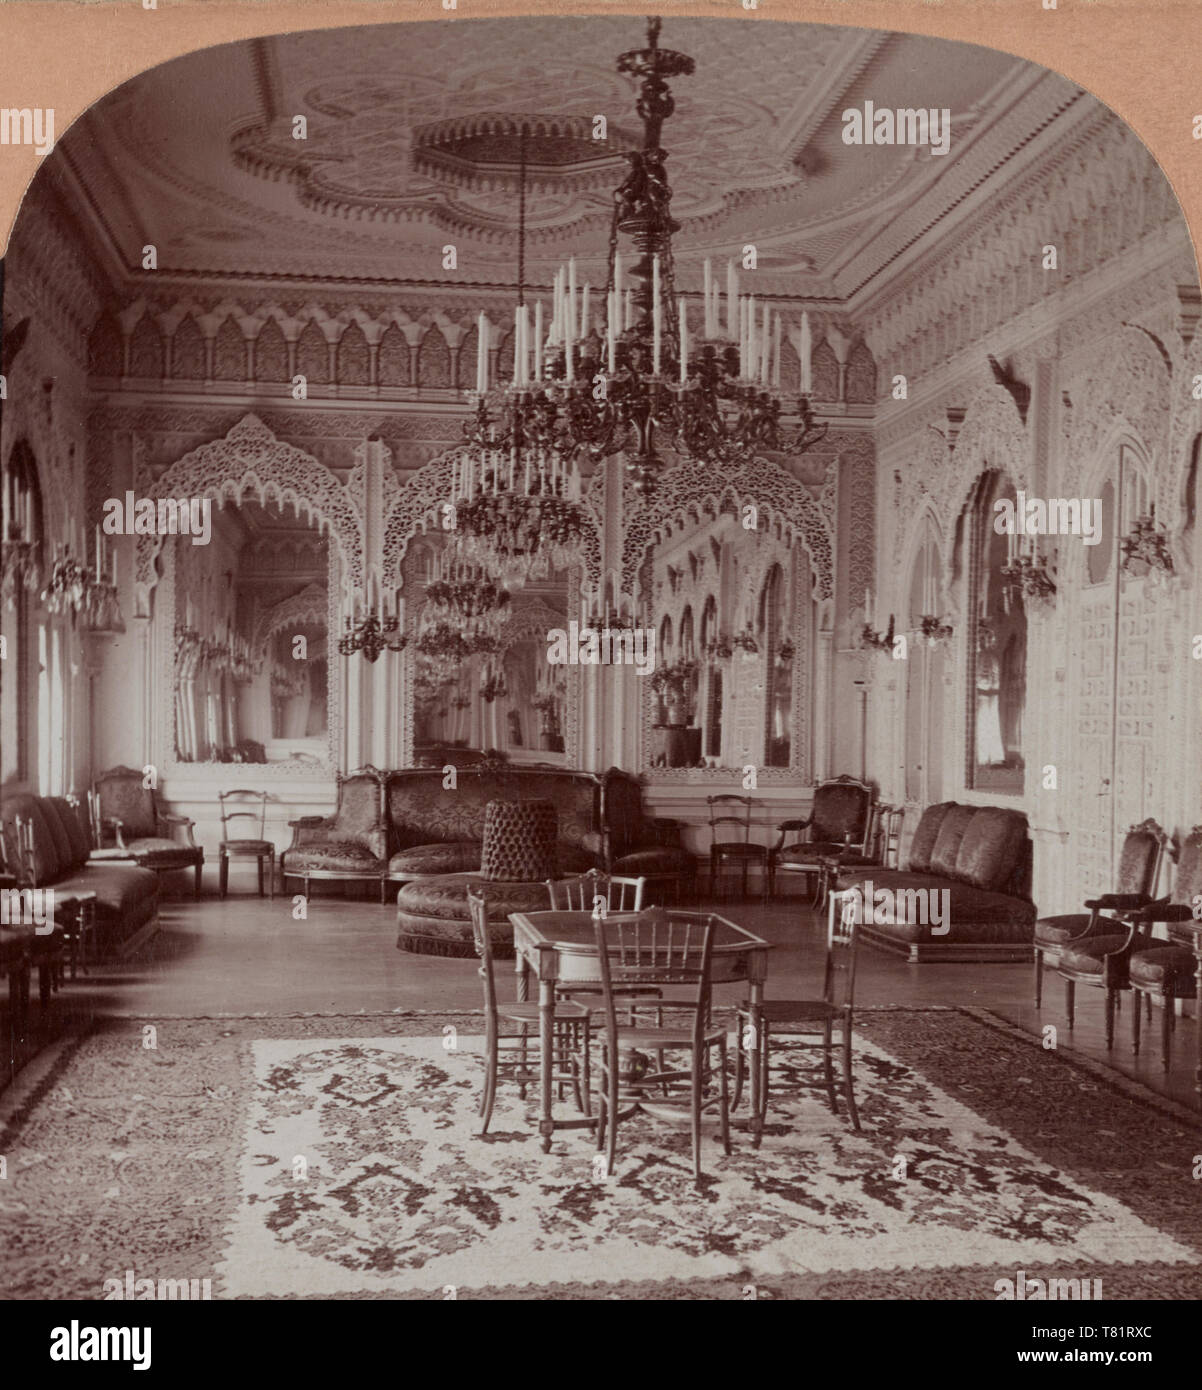 Il Nord Africa, Dar Hassan Pacha Drawing Room, 1902 Foto Stock